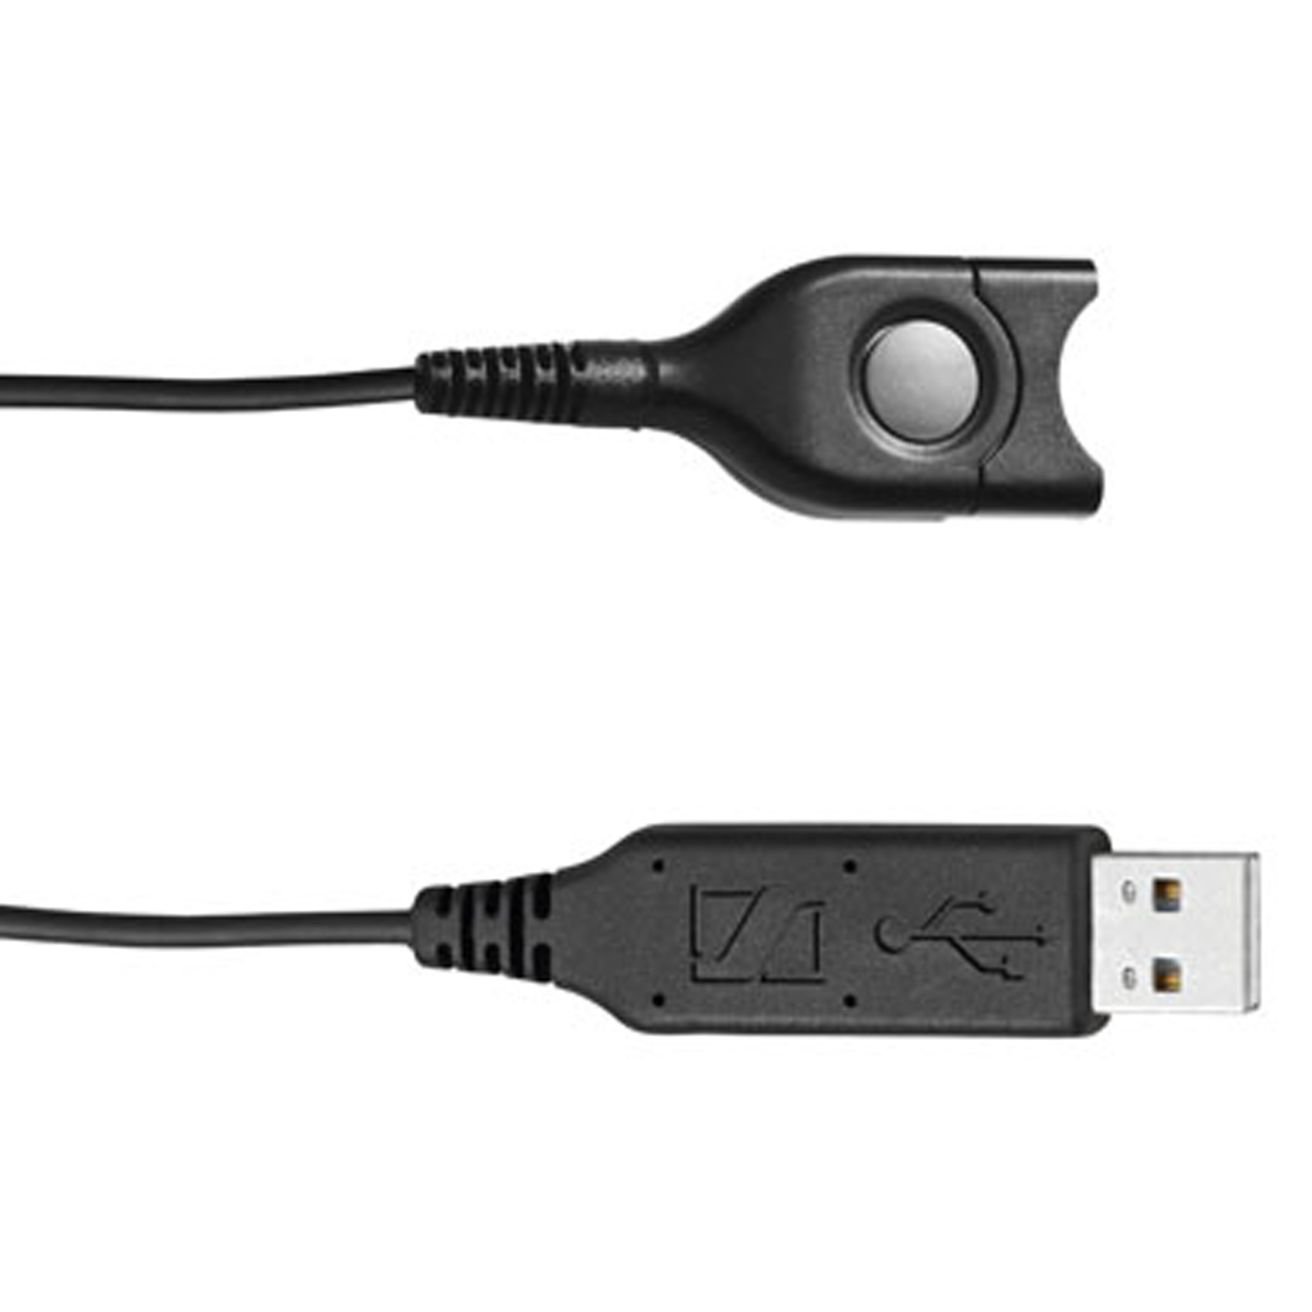 EPOS | Sennheiser Headset connection cable: USB - EasyDisconnect (sound card integrated in USB plug).